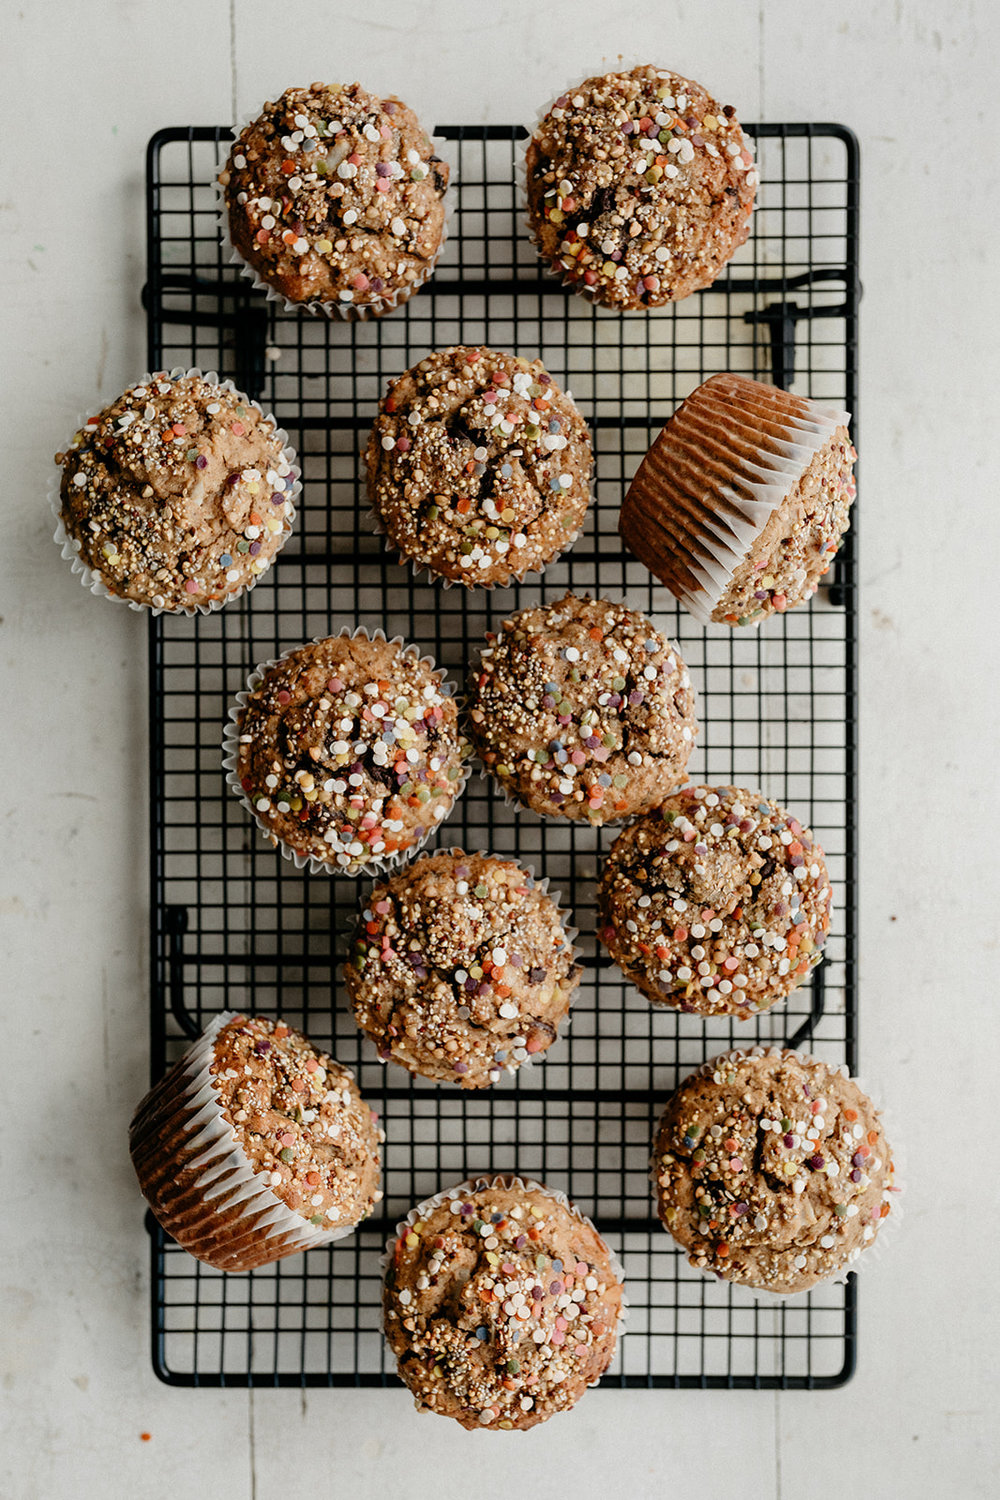 3-6-19-molly-yeh-oatmeal-muffins-1.jpg